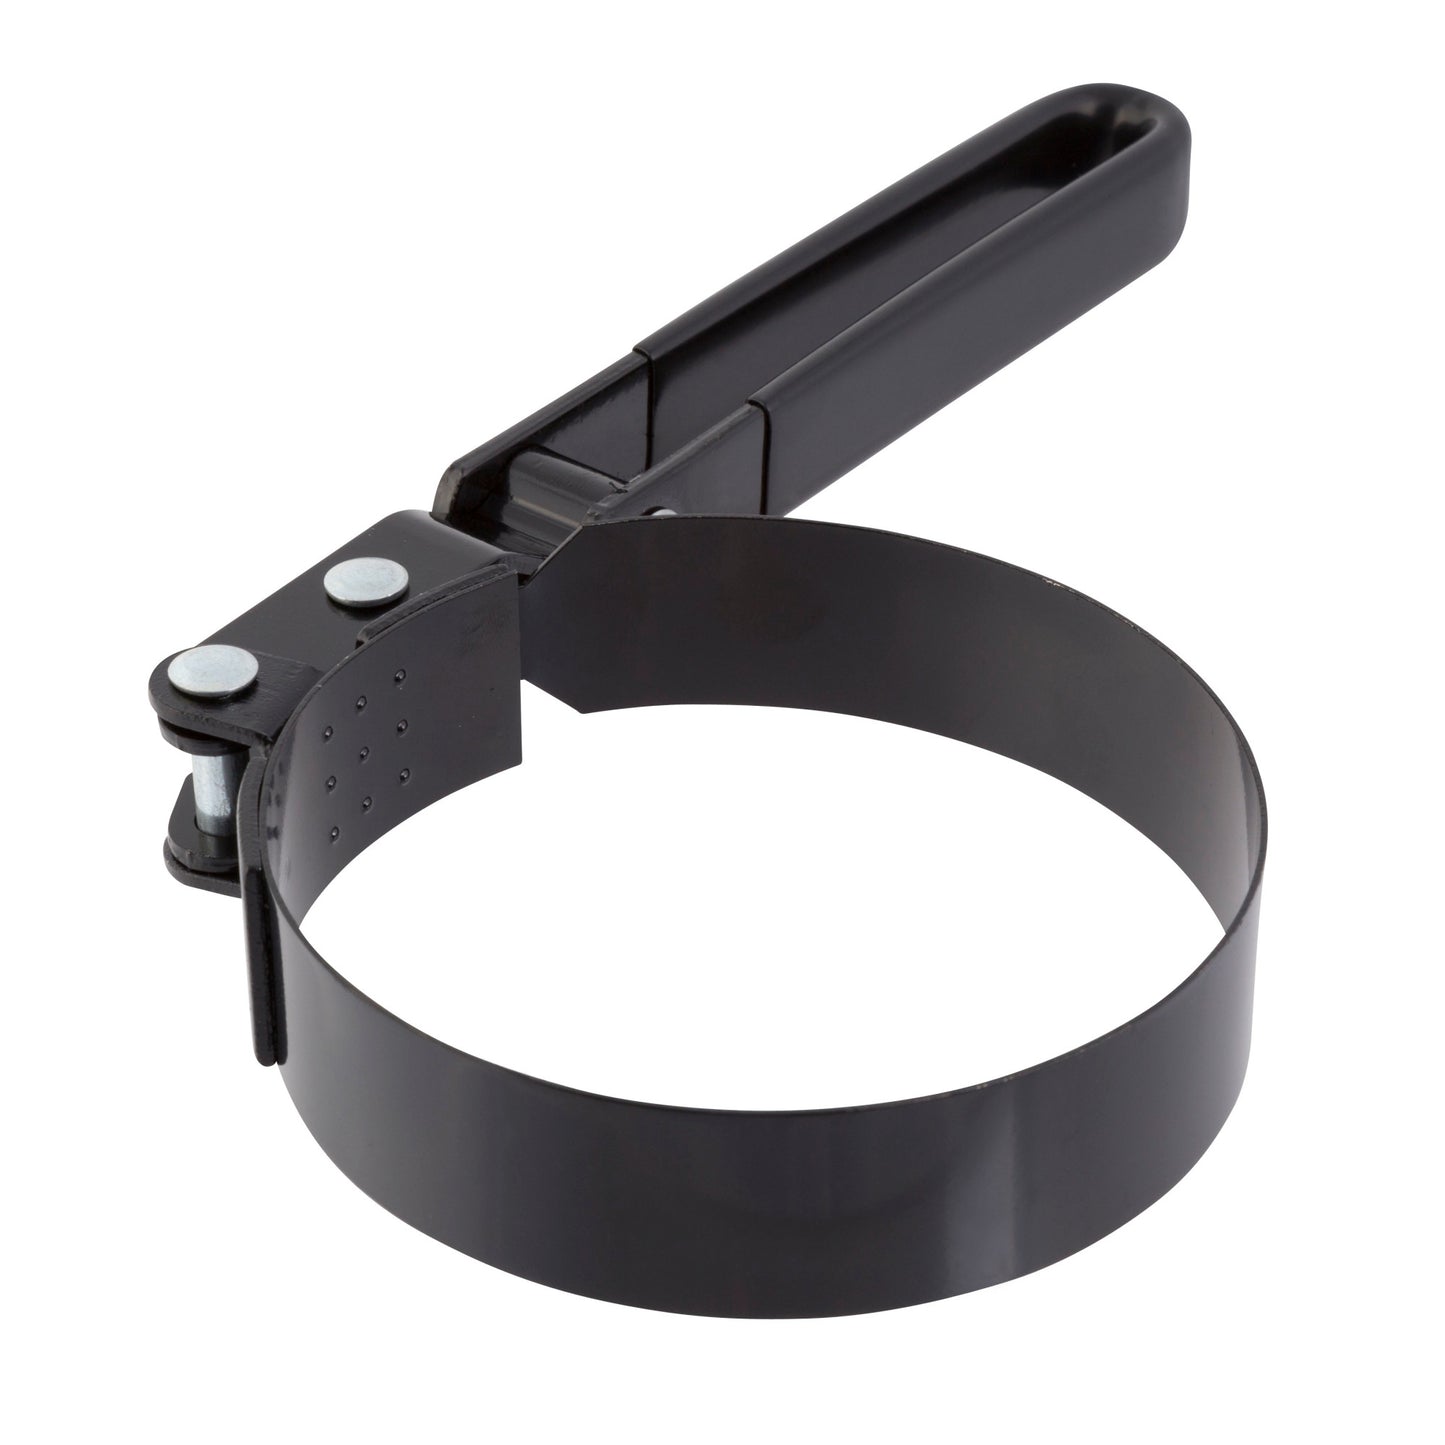 Oil Filter Wrench 3-1/2-inch to 3-7/8-inch